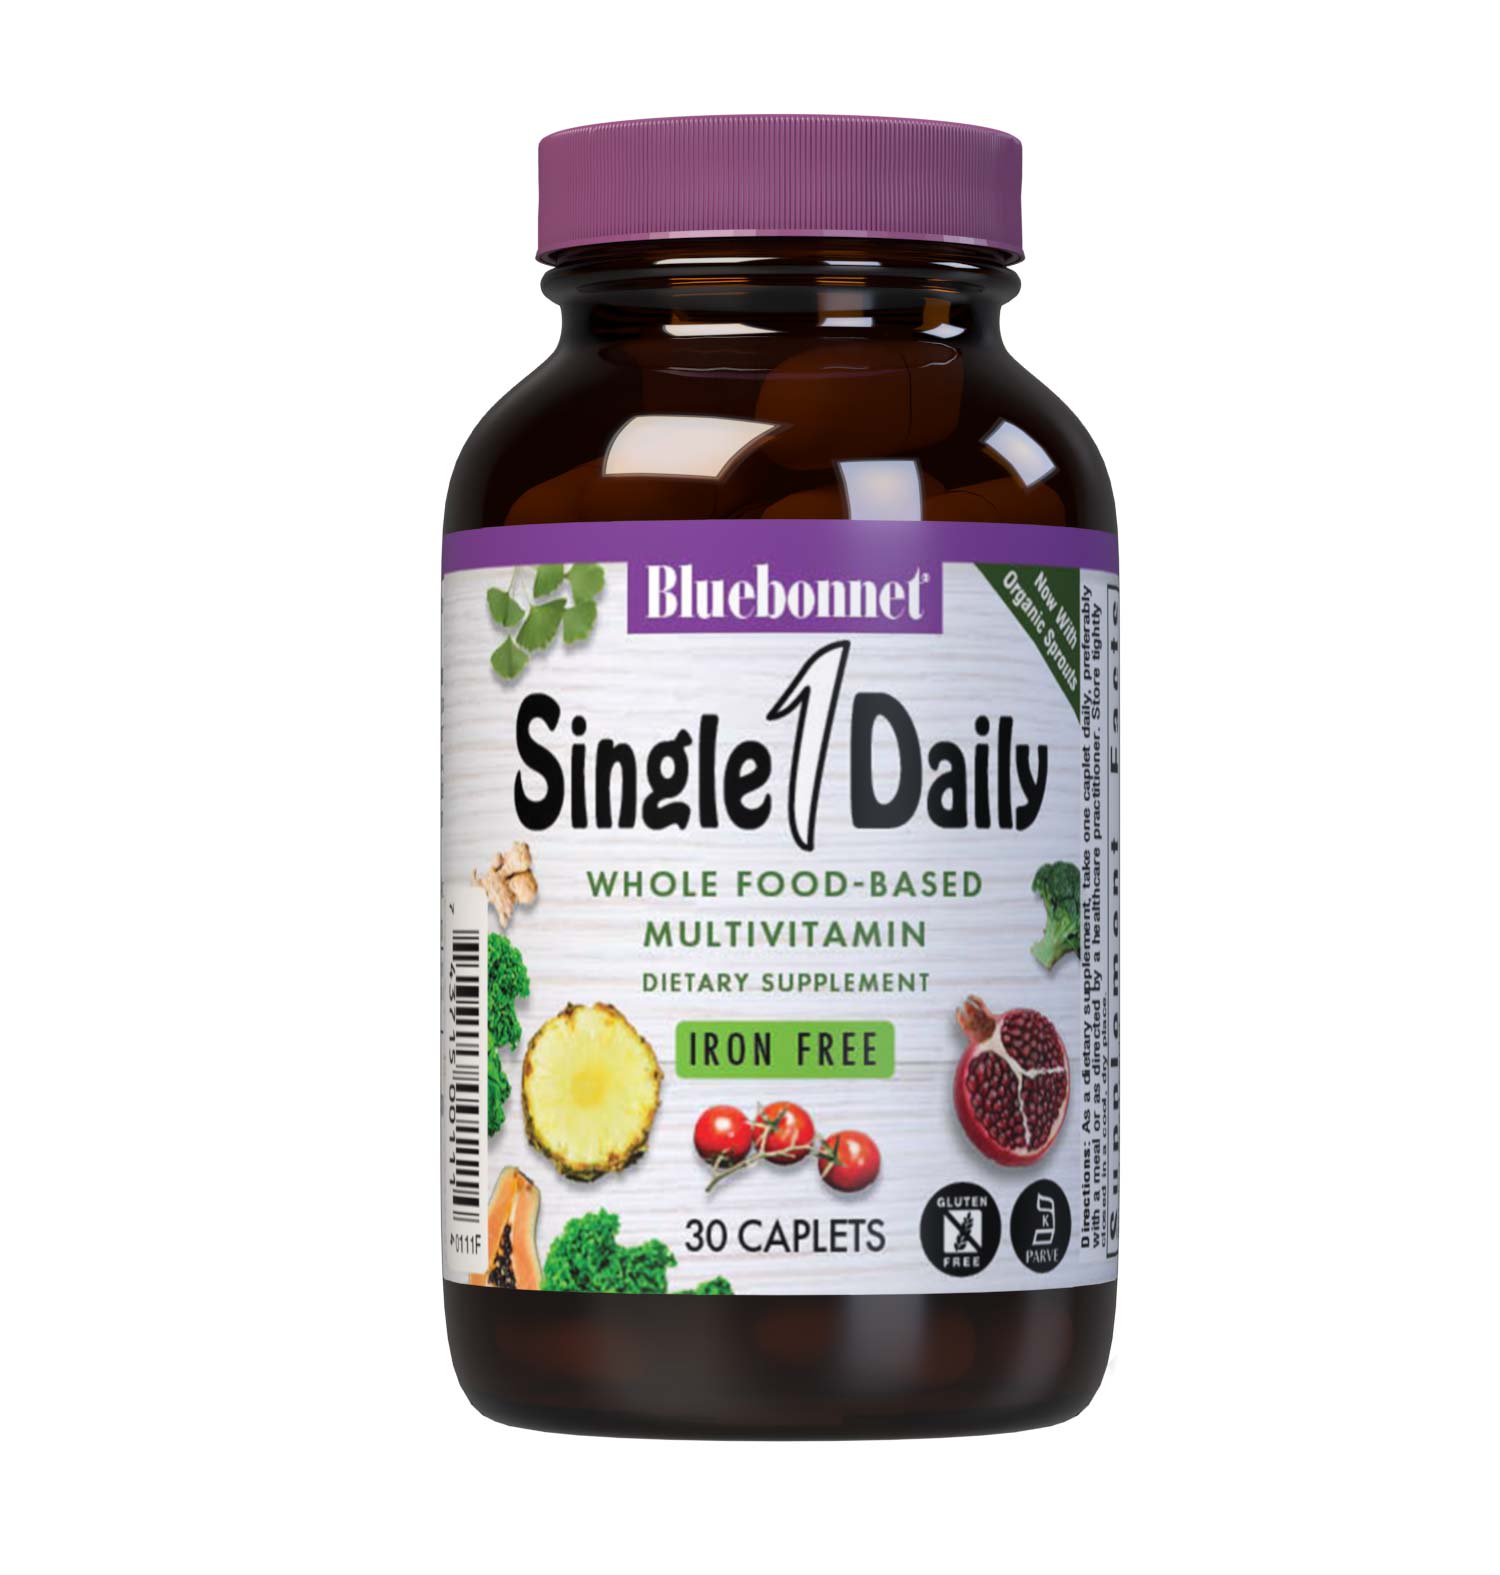 SingleDaily Multiple (Iron-Free) 30 caplets whole food-based formula offers essential vitamins, minerals and enzymes from unique, kosher-certified, plant-based ingredients, such as adaptogenic and immune-boosting herbs, greens from nutrient-dense spirulina, chlorella and chlorophyll, lycopene from tomatoes and potent anti-aging antioxidants from pomegranate fruit. #size_30 count